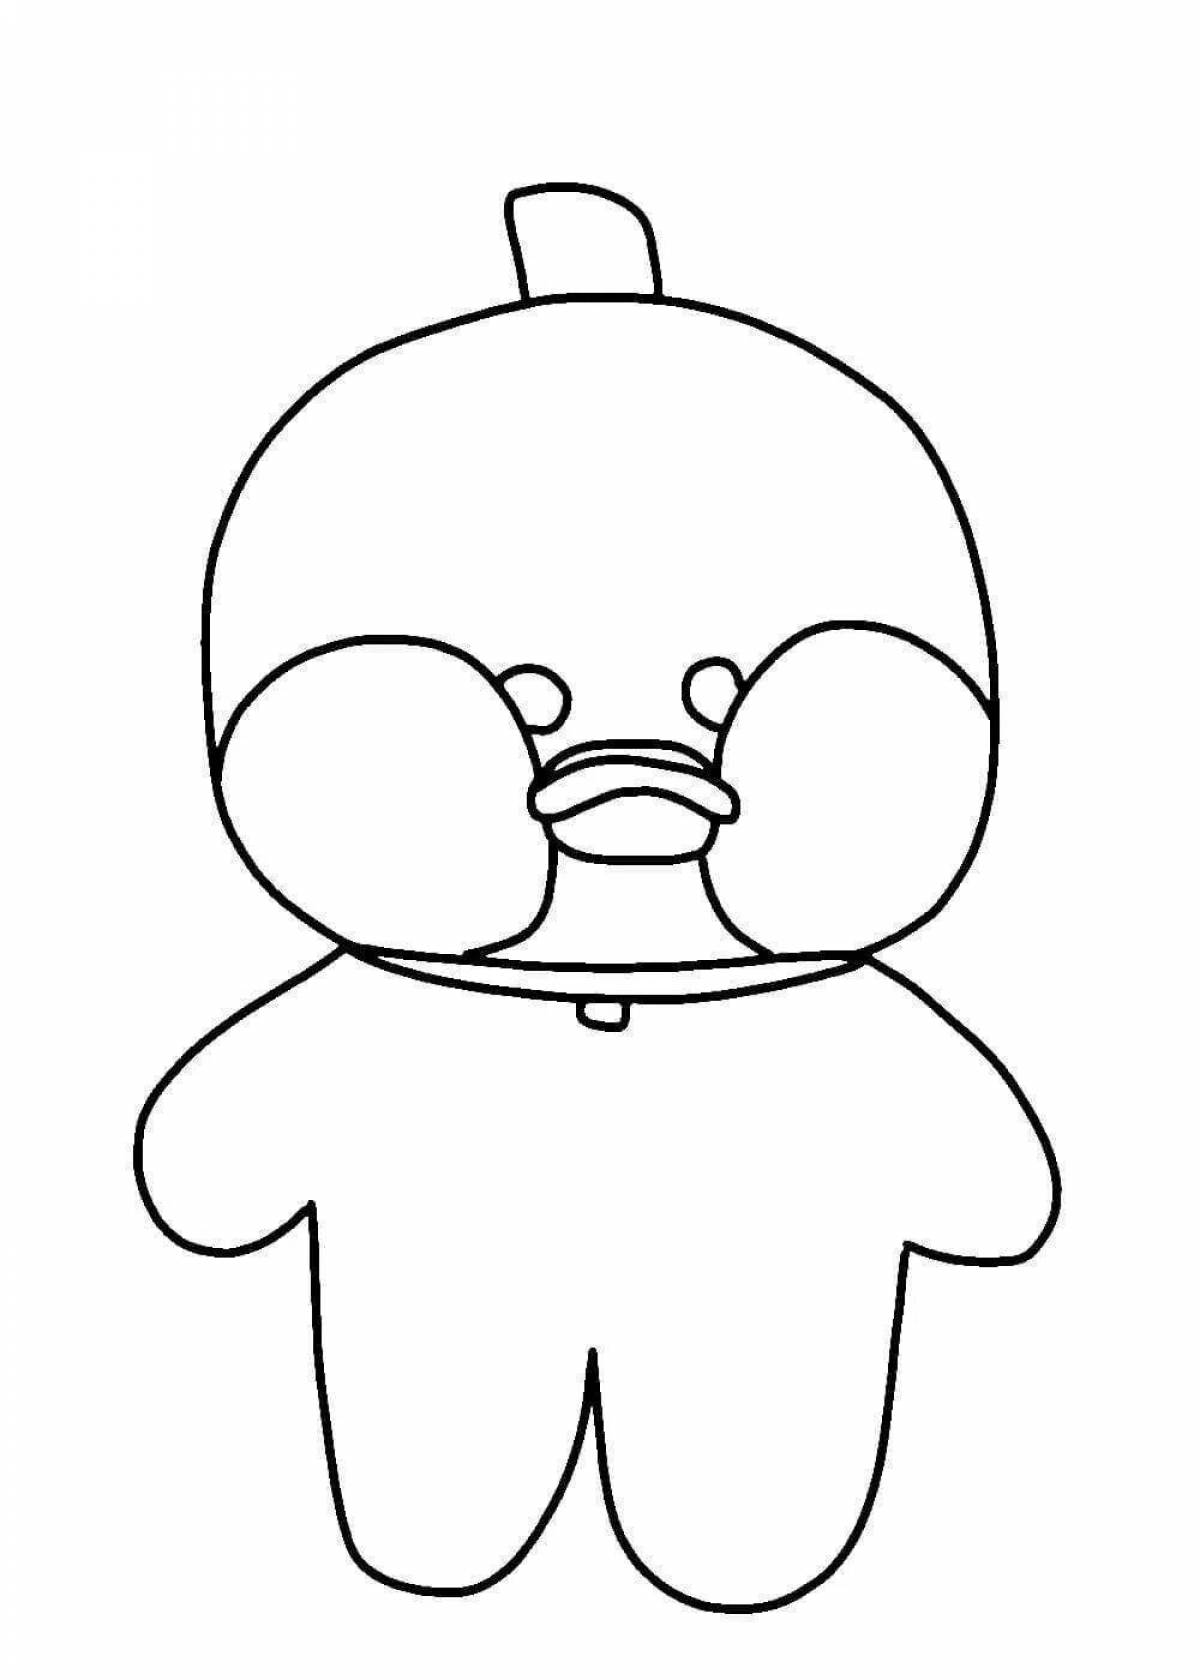 Coloring page witty duck in clothes